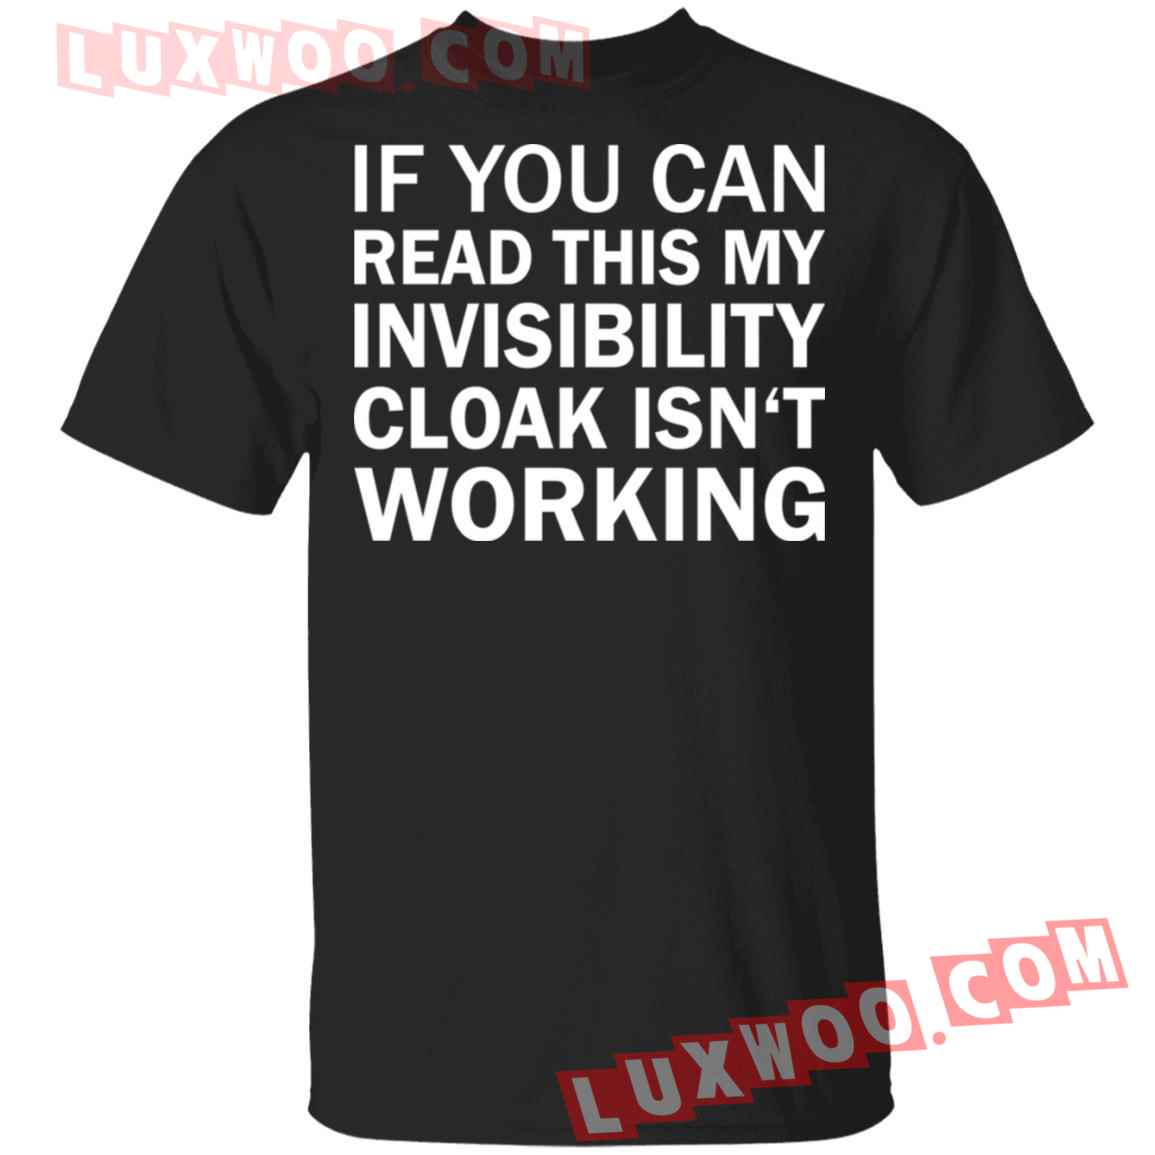 If You Can Read This My Invisibility Cloak Isnt Working Shirt